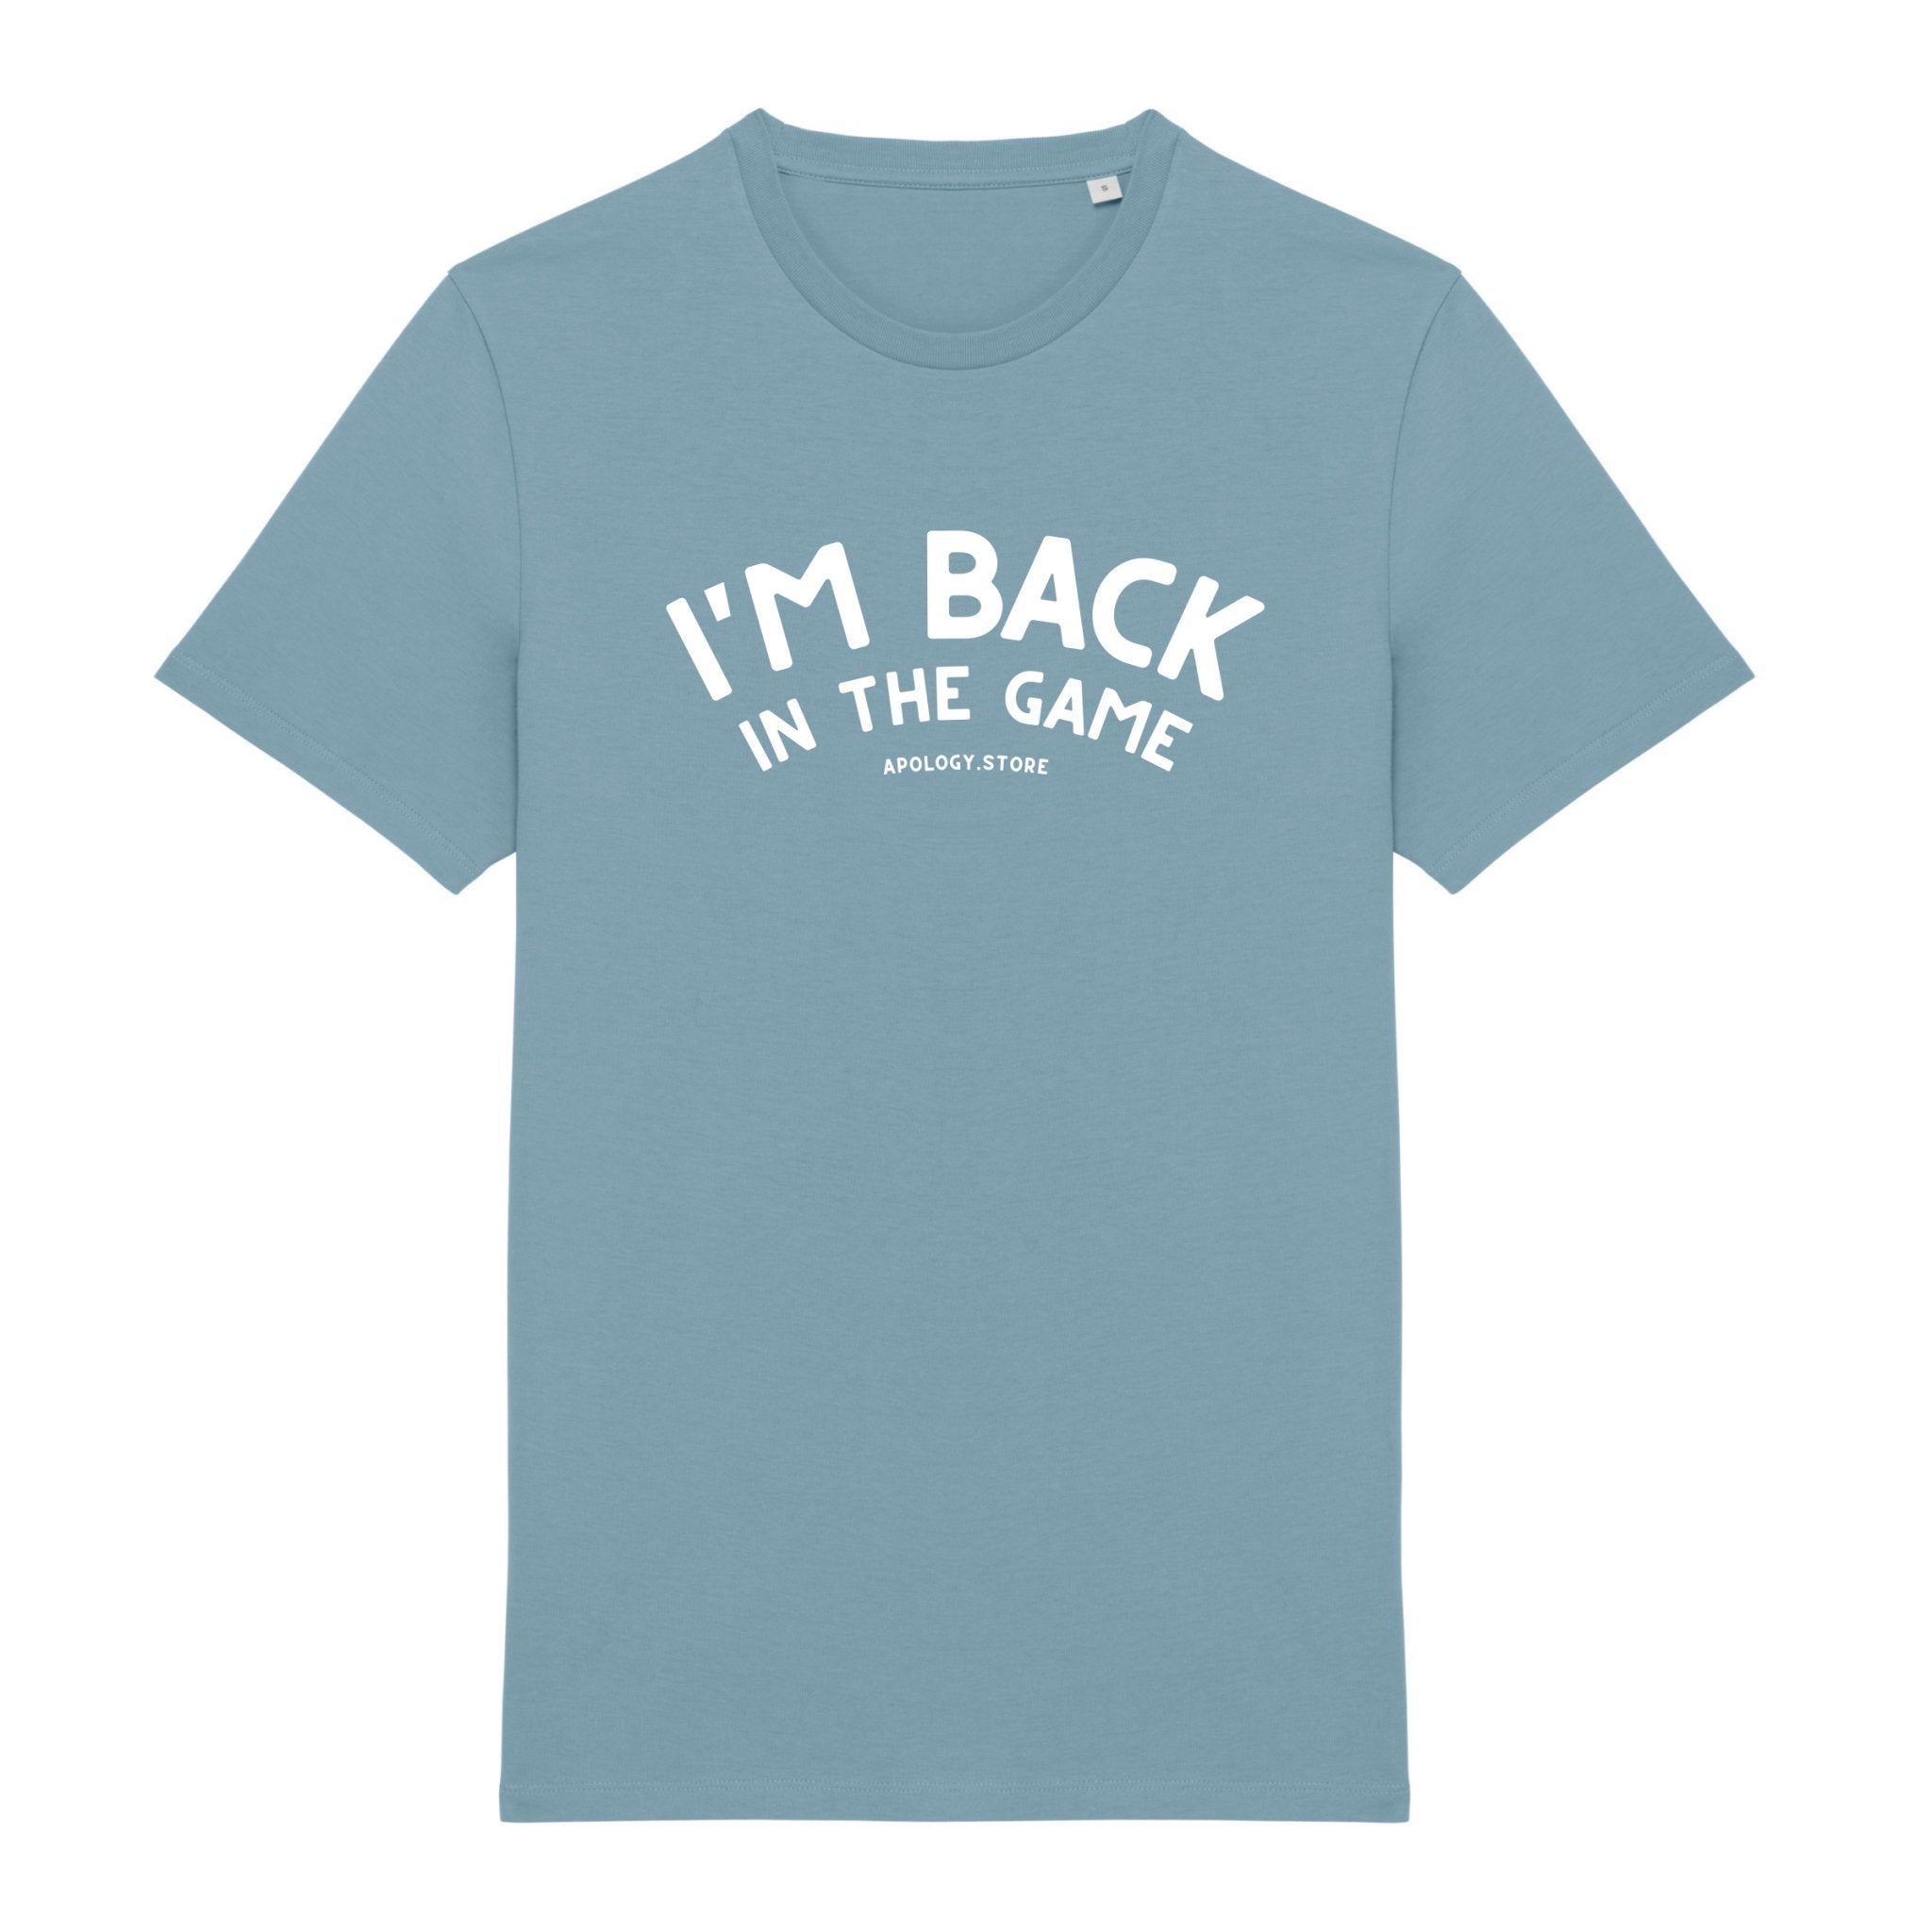 I'm Back in The Game T-shirt - Made in Portugal